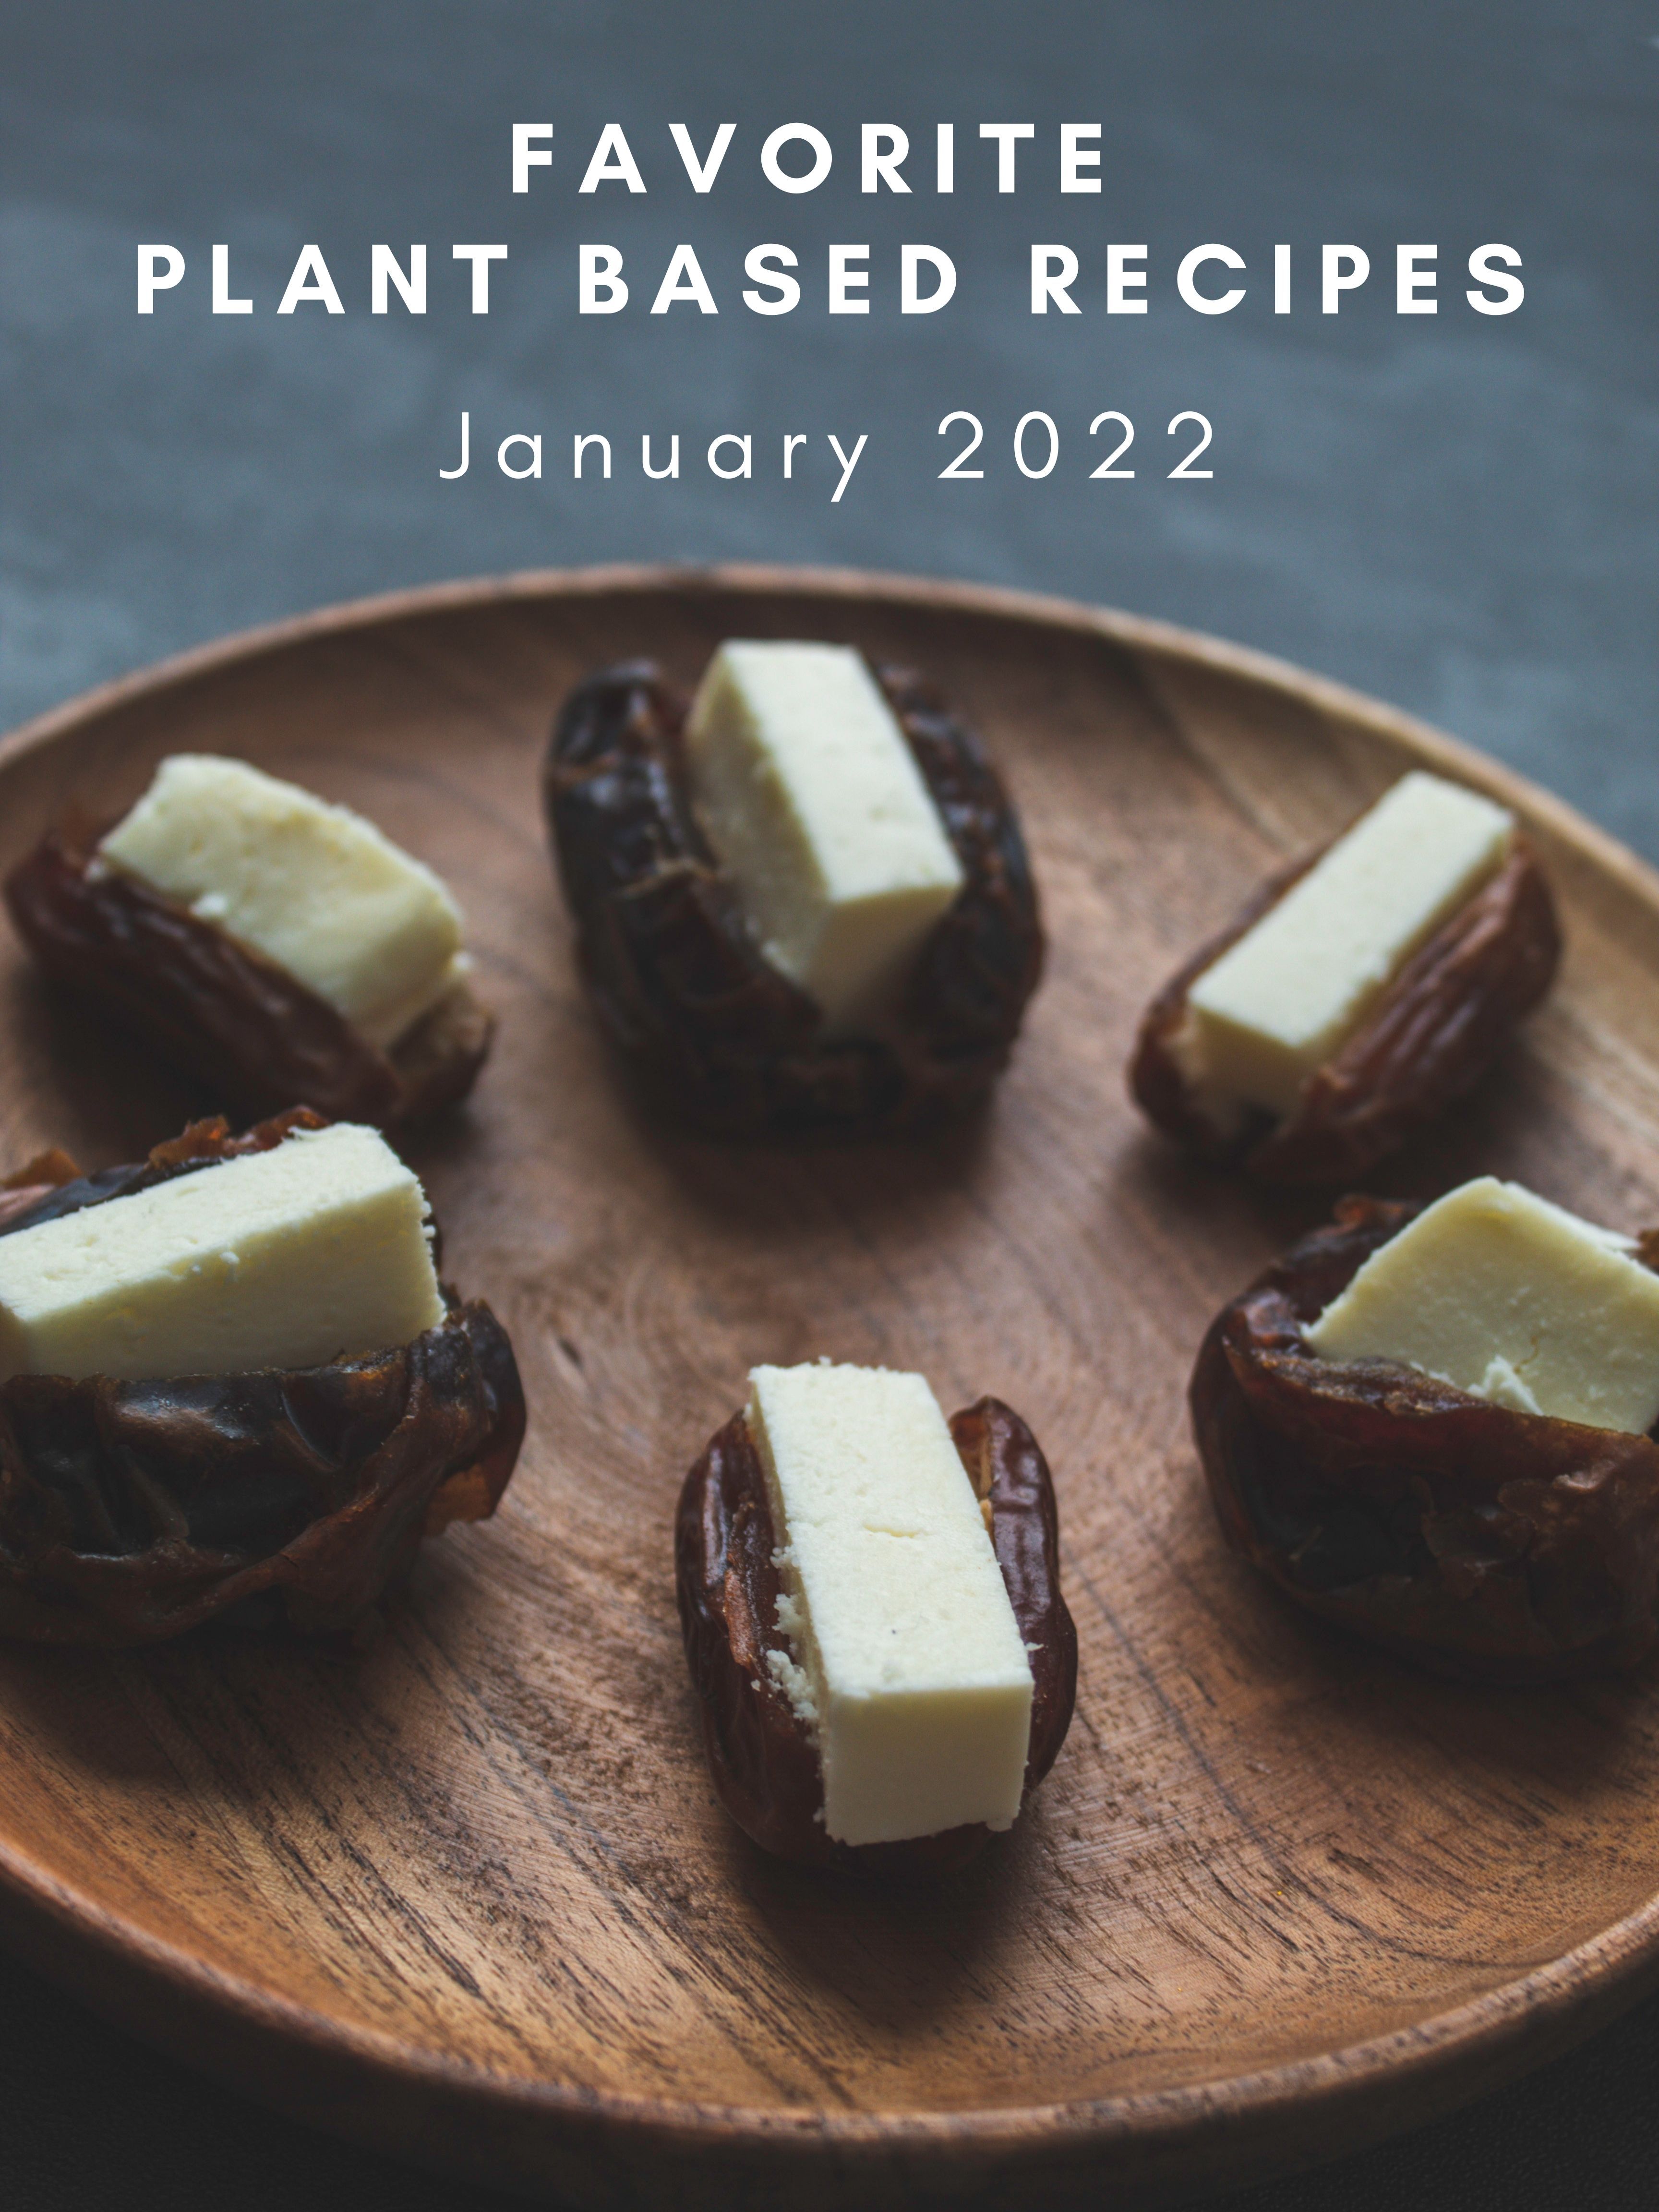 wooden plate with 6 cheese stuffed dates and title of favorite plant based recipes